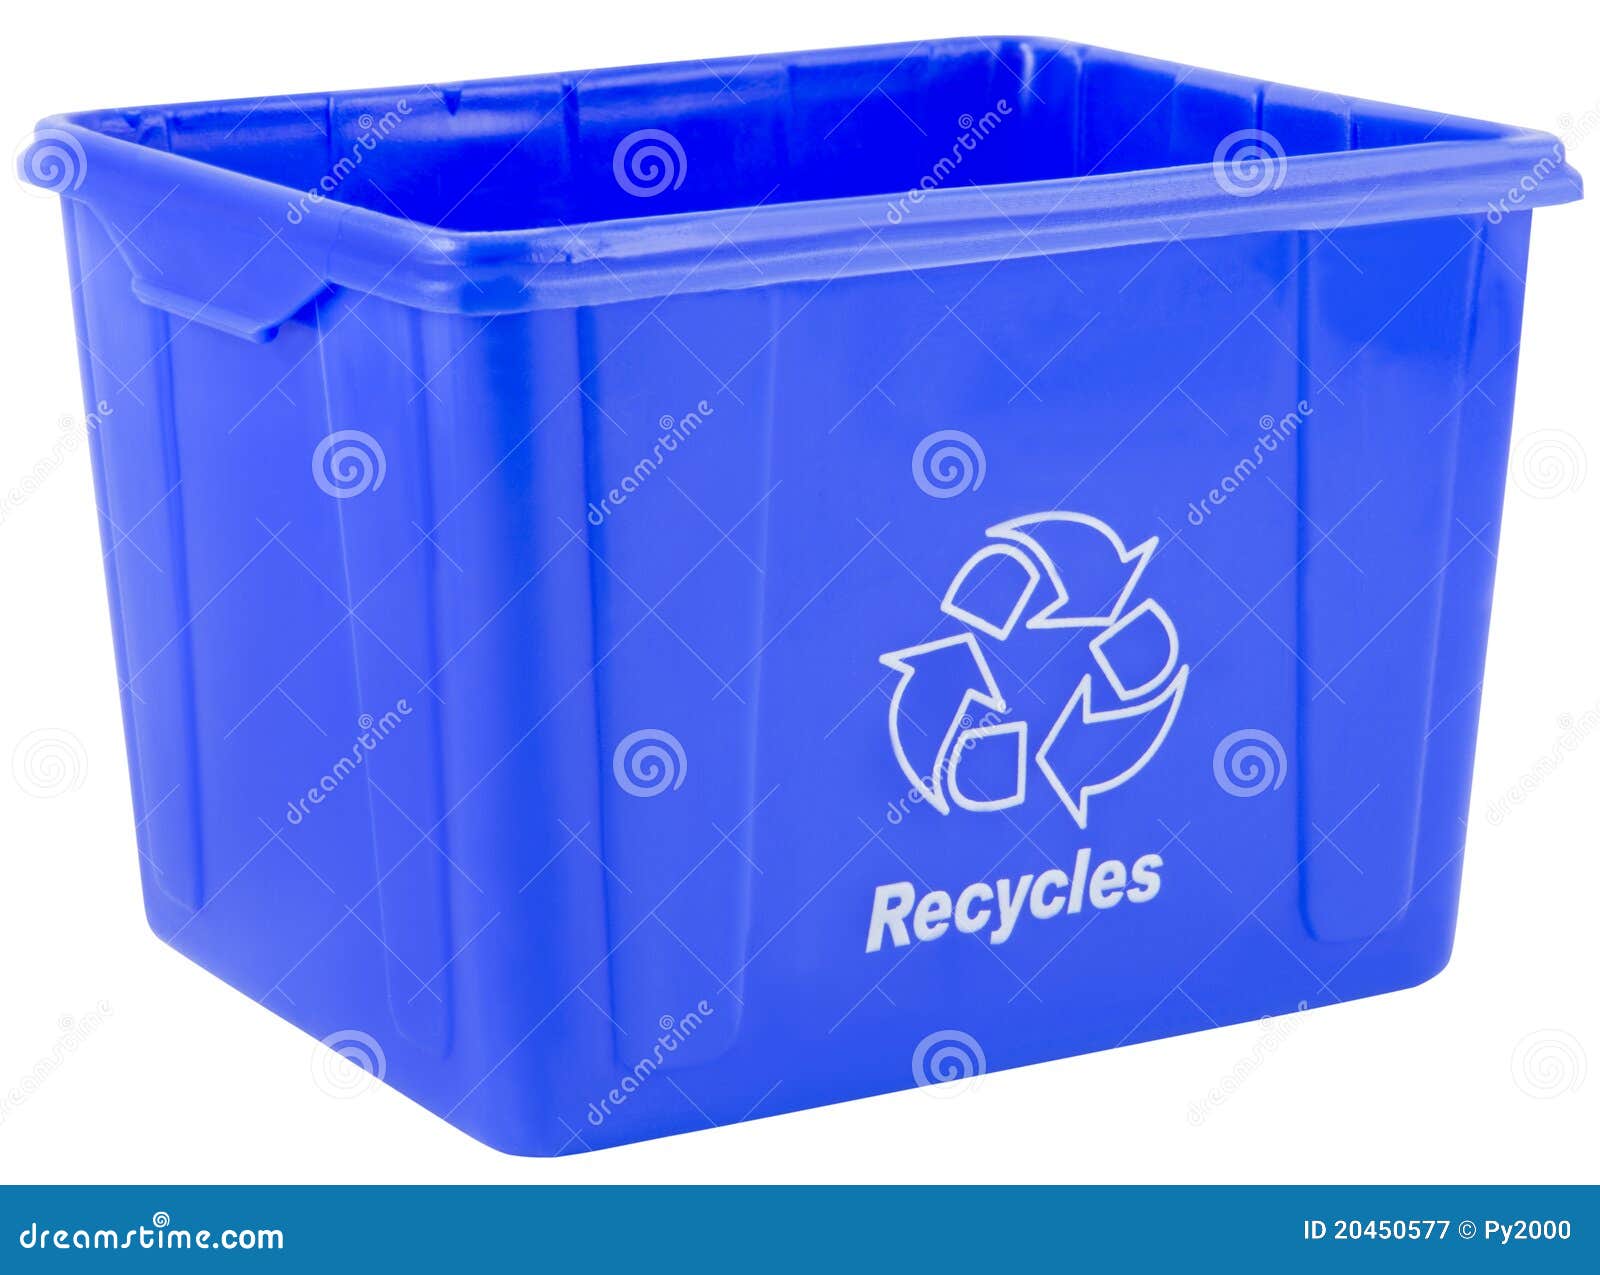 Recycle Bin Stock Image Image Of Path Protection Friendly